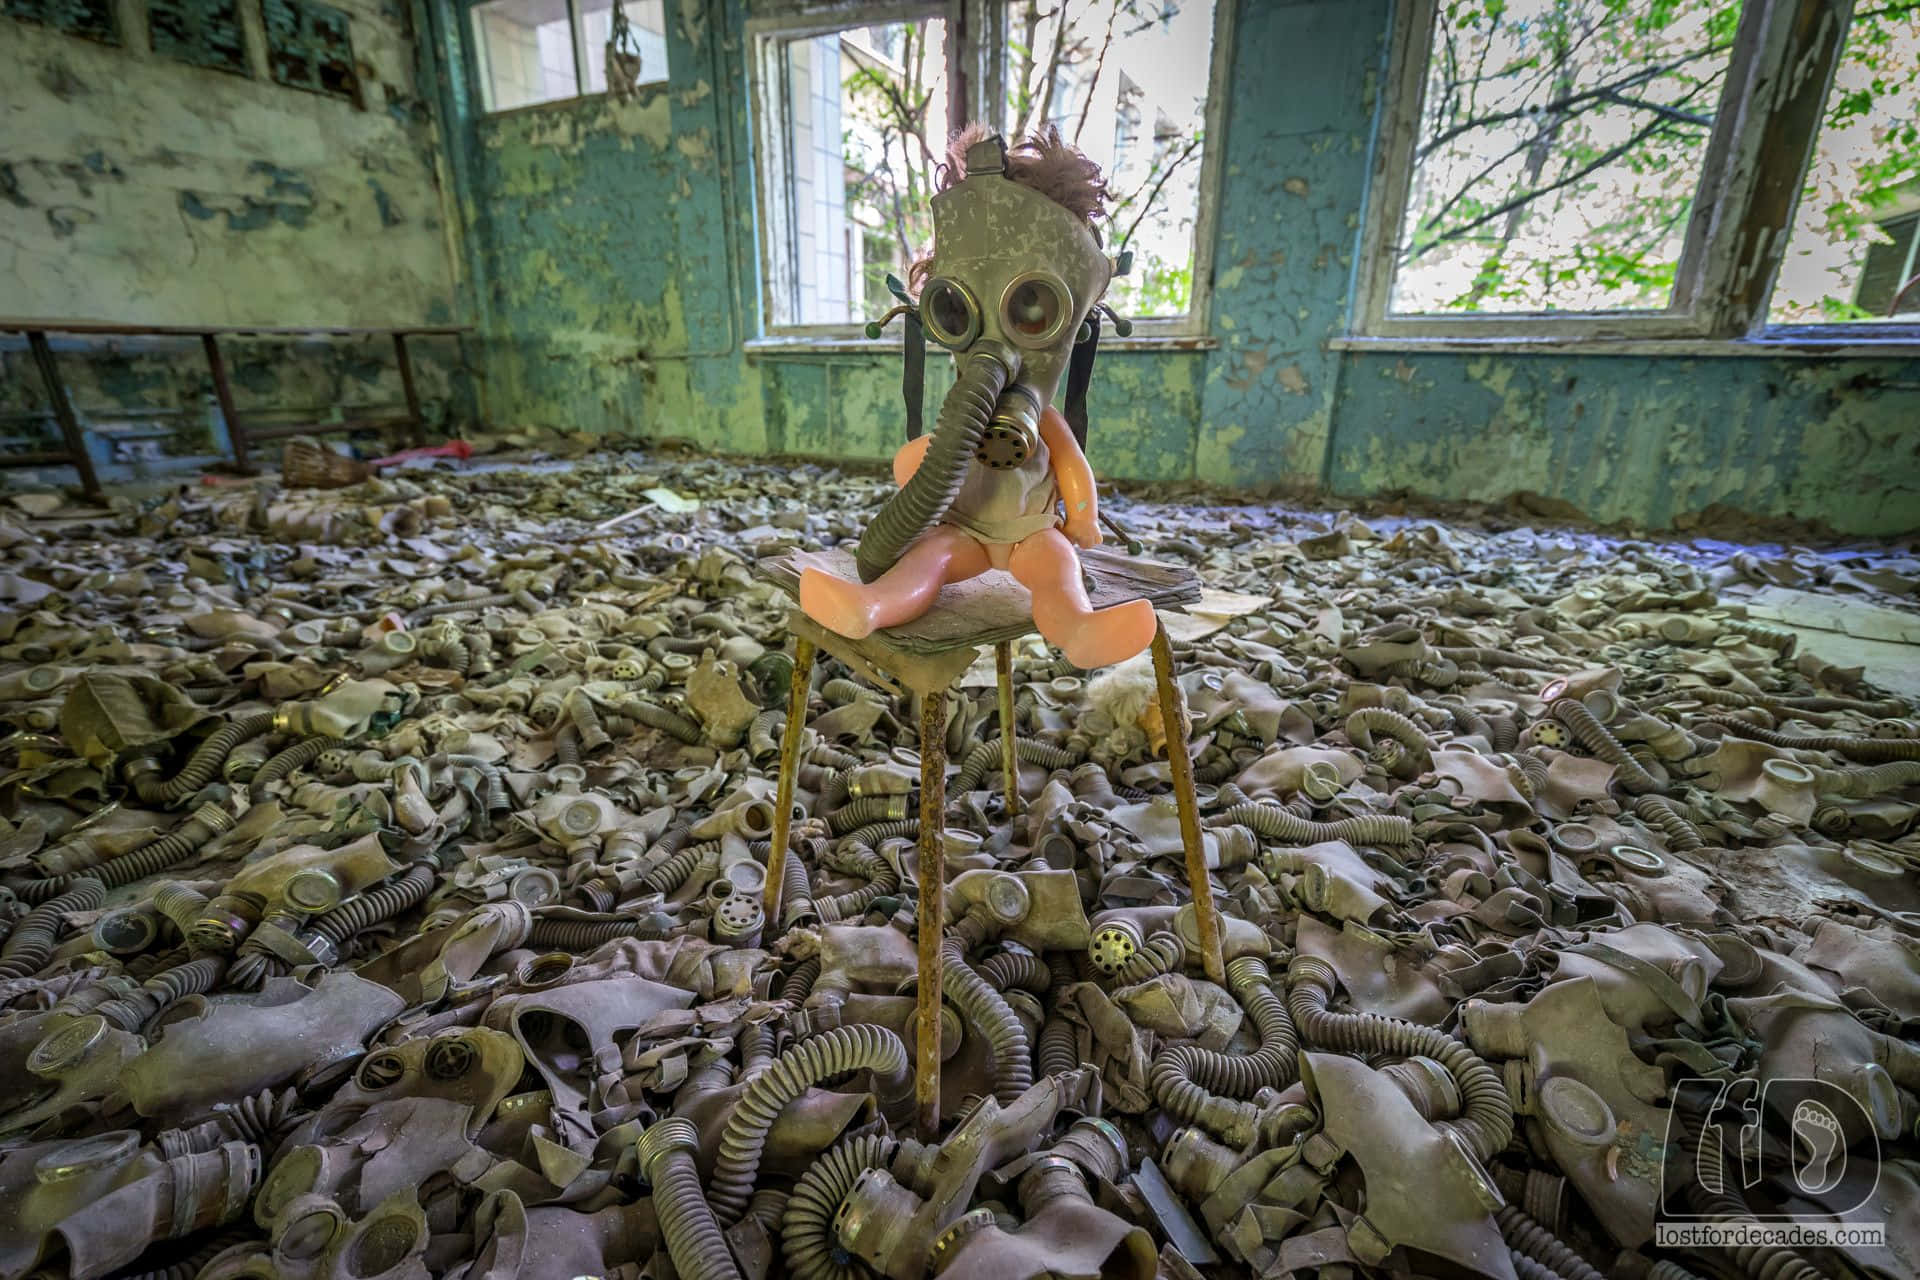 Nuclear Disaster at the Chernobyl Power Plant